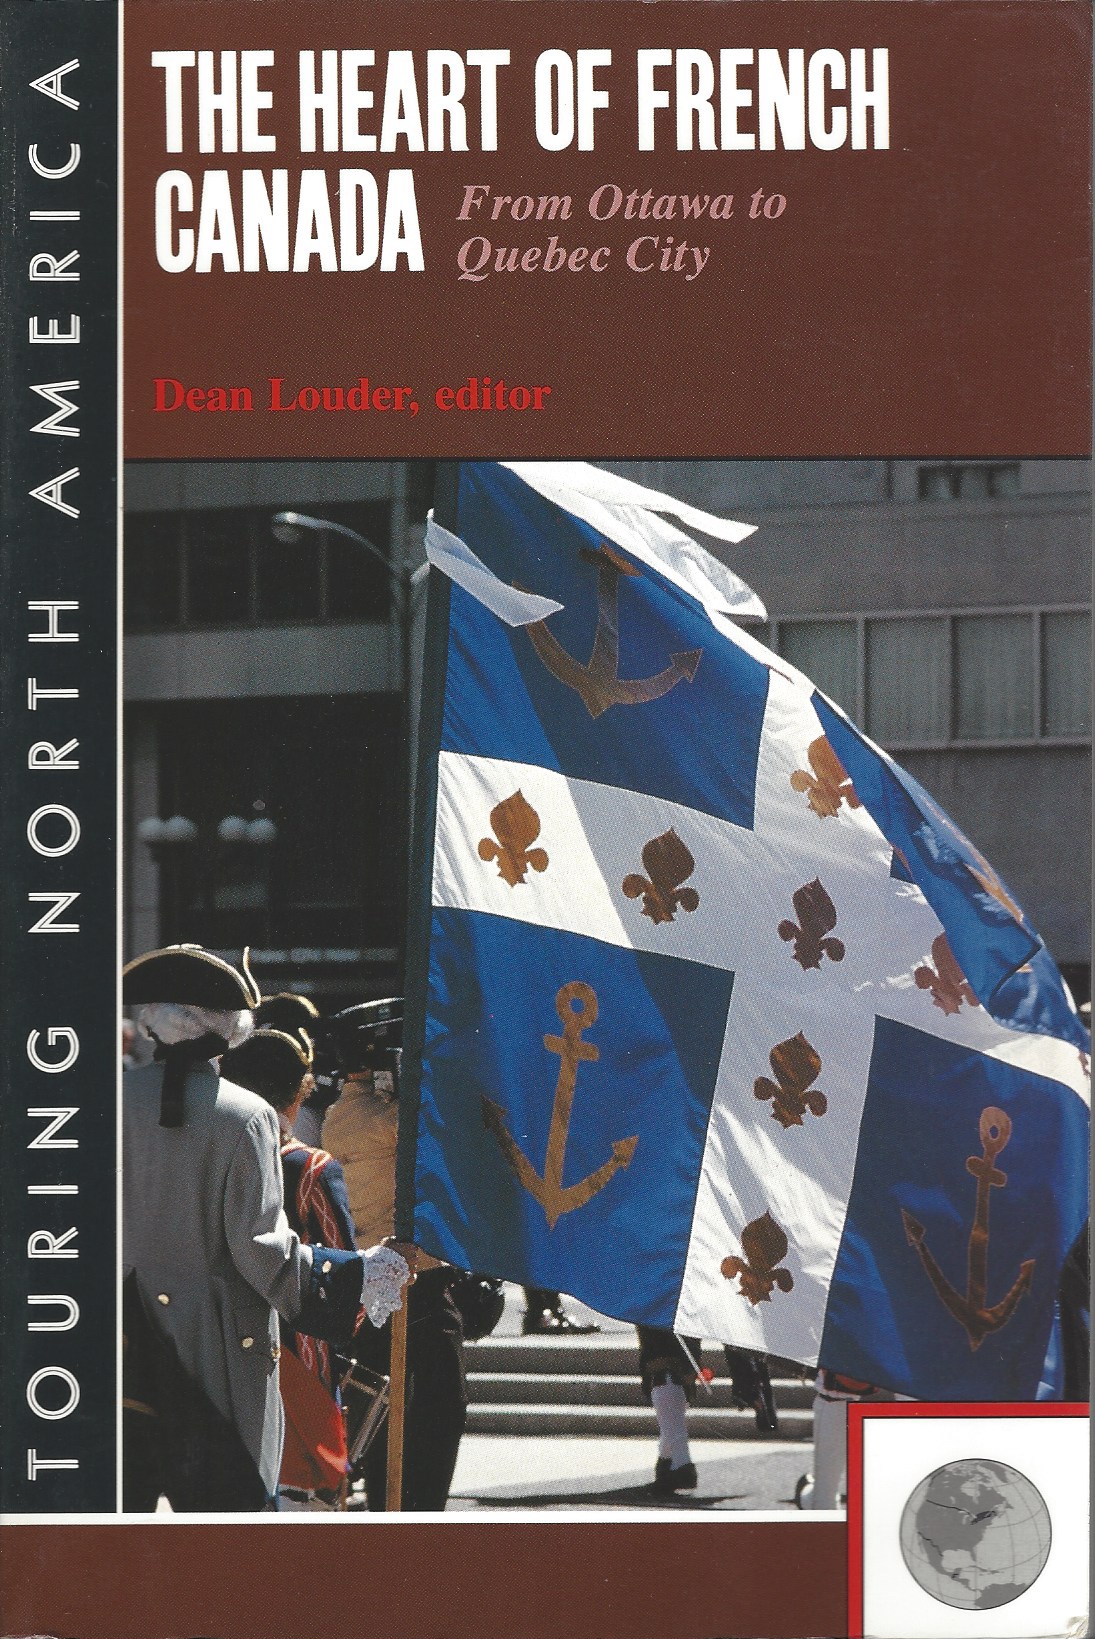 LOUDER, DEAN, EDITOR - Heart of French Canada, the from Ottawa to Quebec City